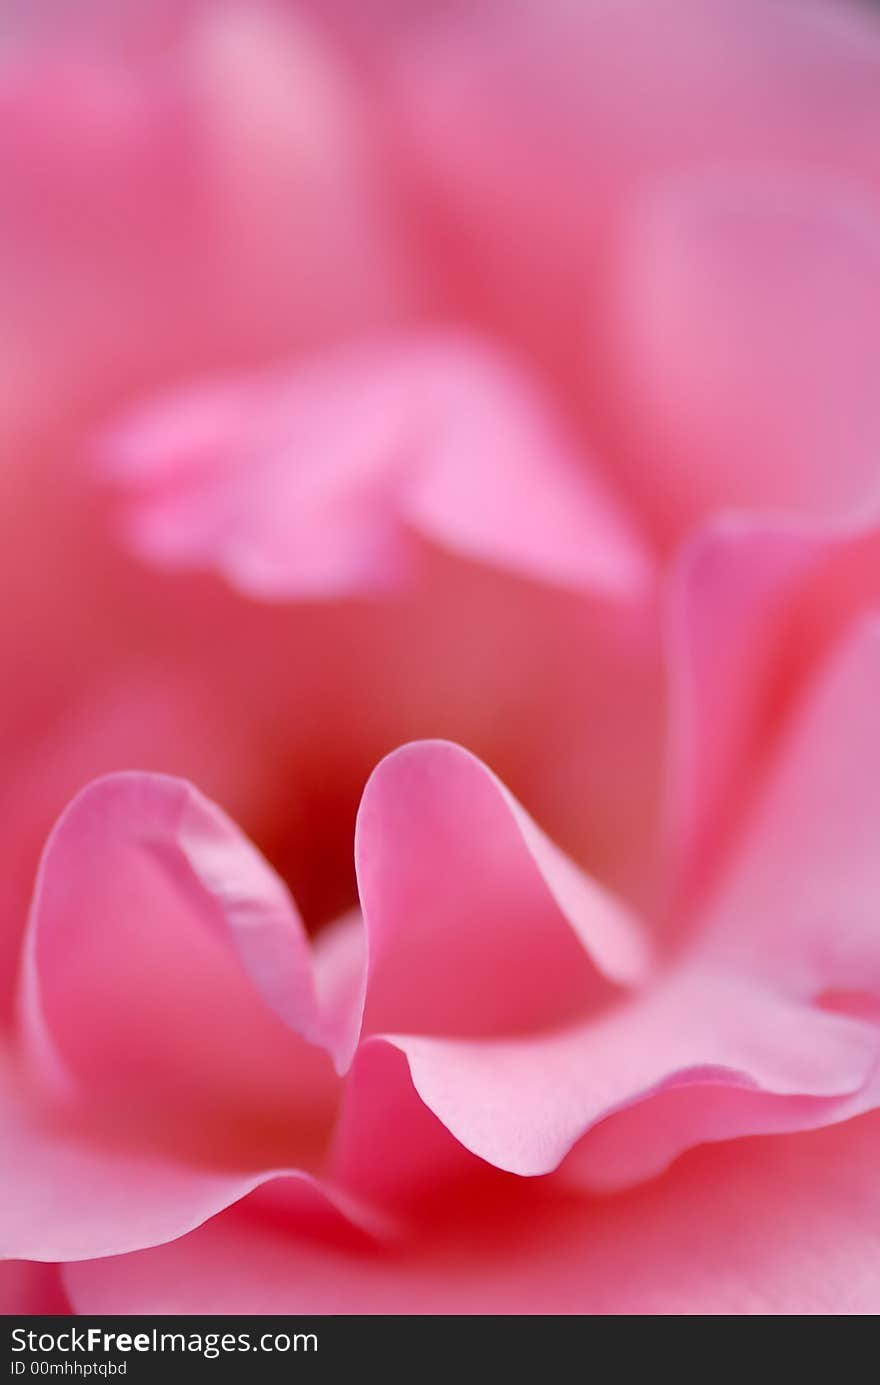 Close up photography of petals of a flower. Close up photography of petals of a flower